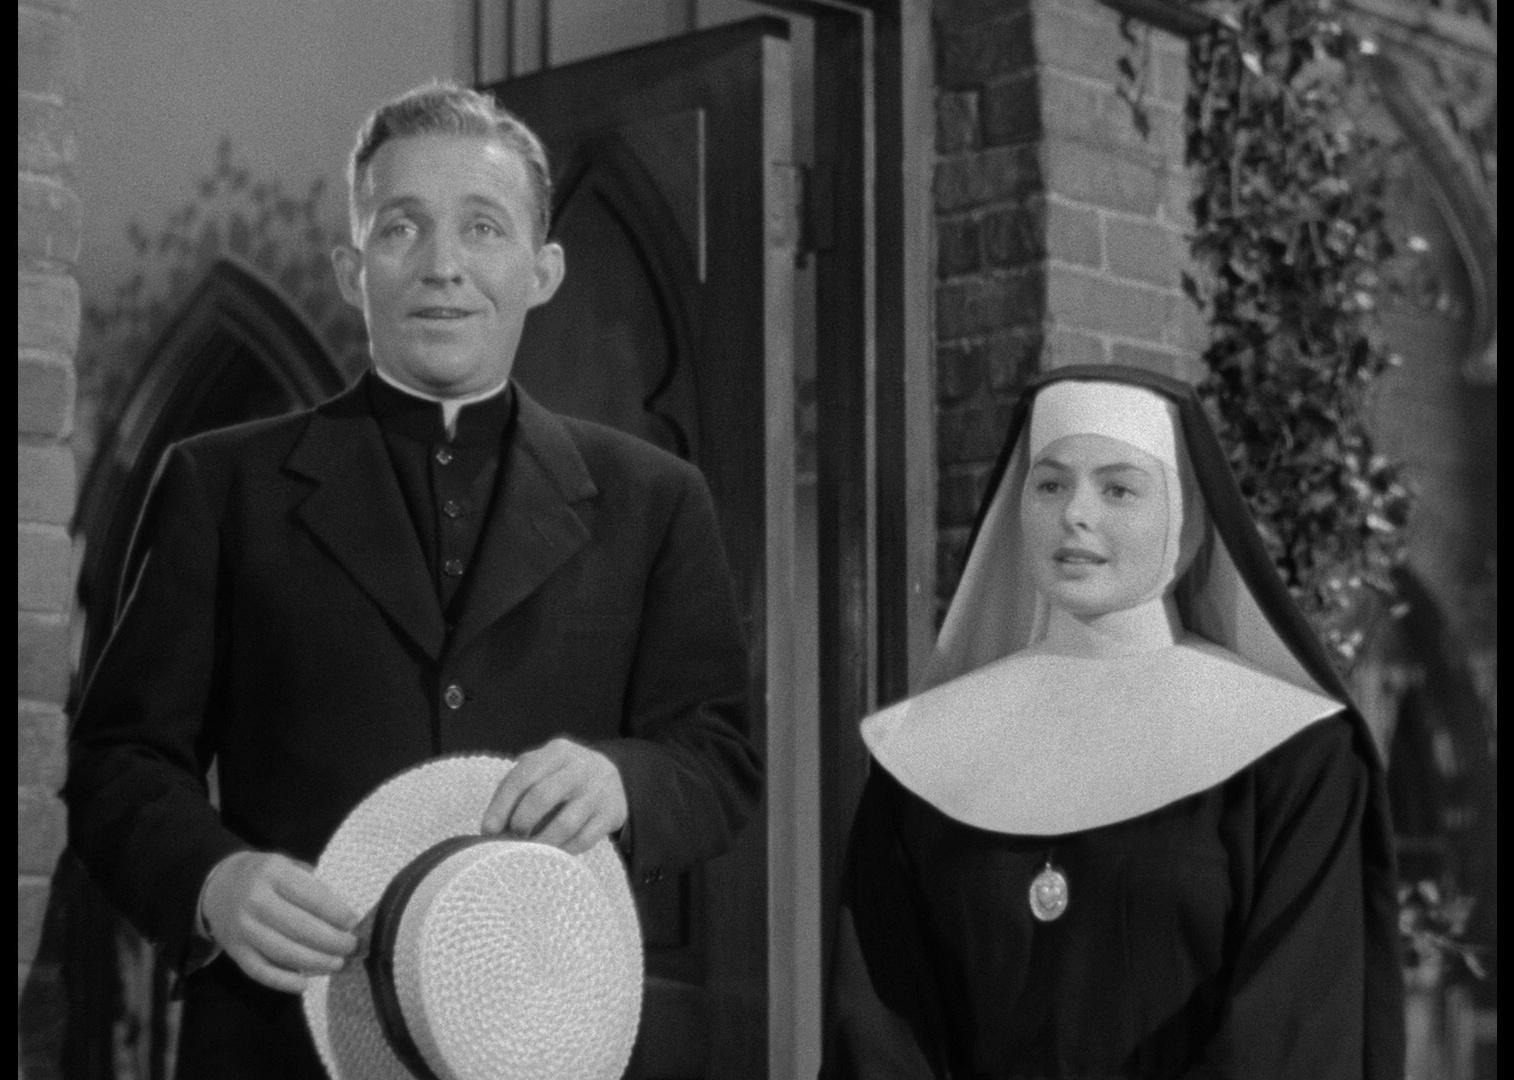 Ingrid Bergman, dressed as a nun, and Bing Crosby, holding a hat, standing together.